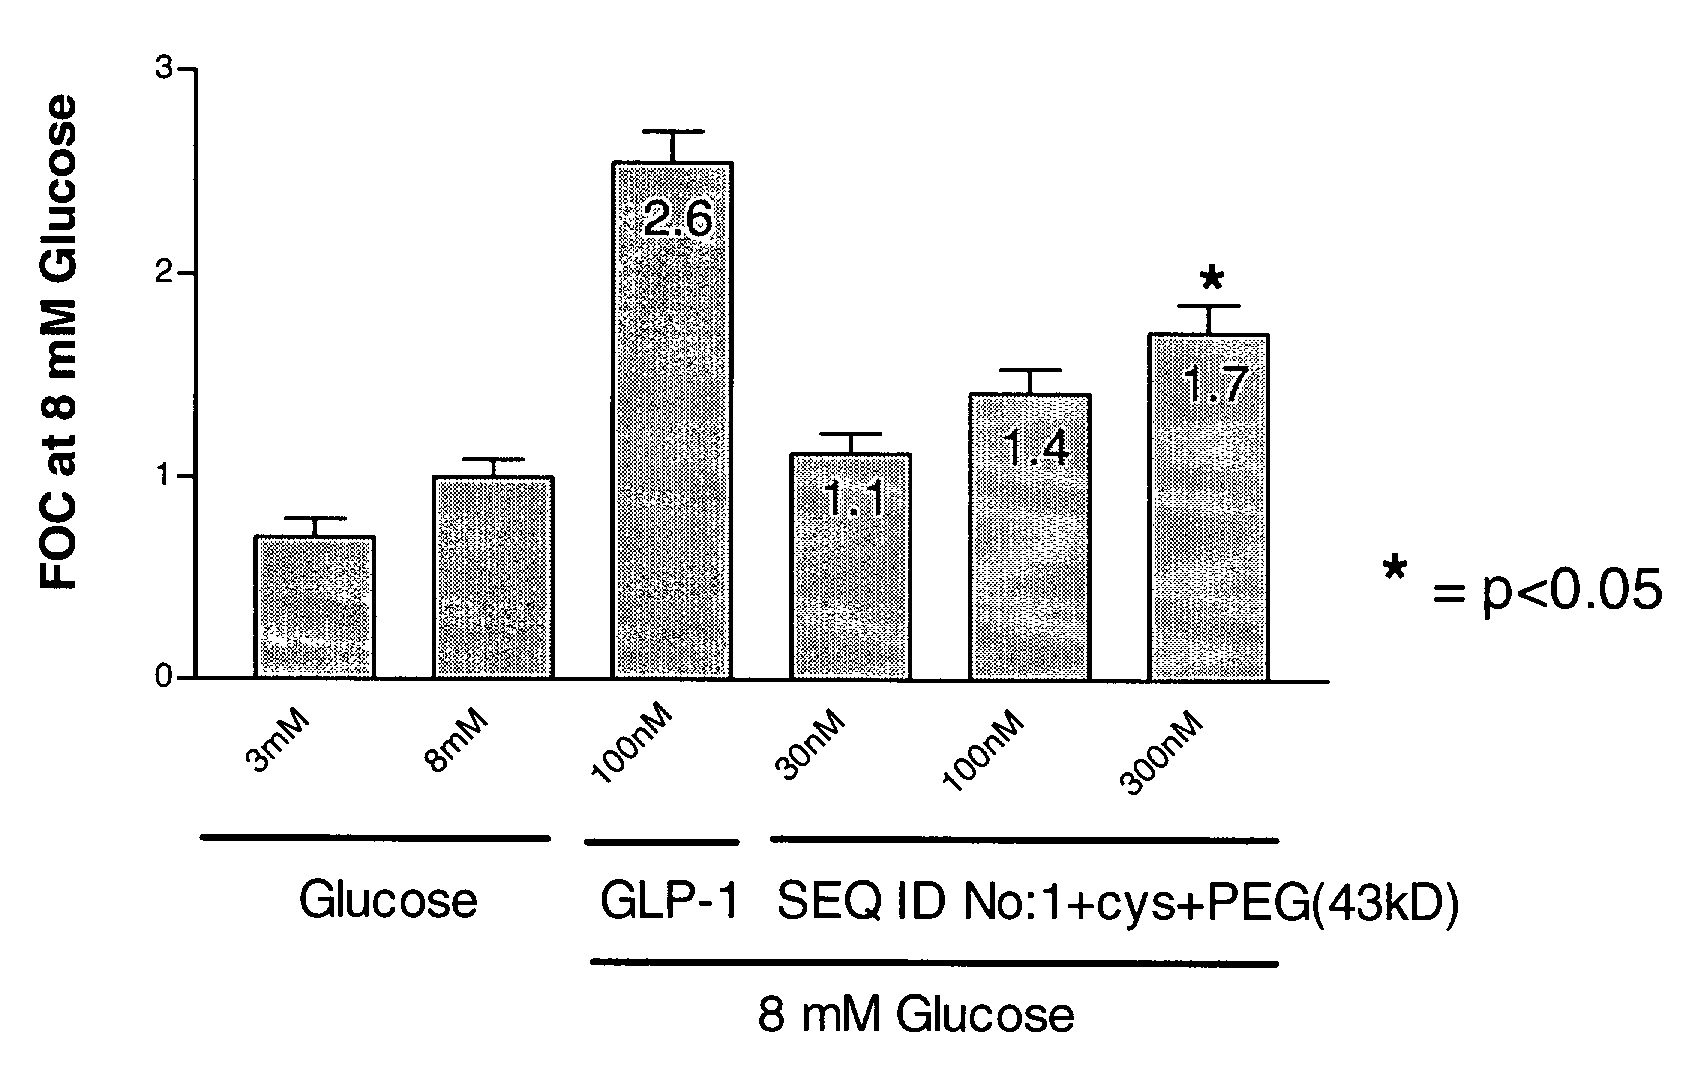 Pegylation of Vasoactive Intestinal Peptide (Vip) / Pituitary Adenylate Cyclase Activating Peptide (Pacap) Receptor 2 (Vpac2) Agonists and Methods of Use